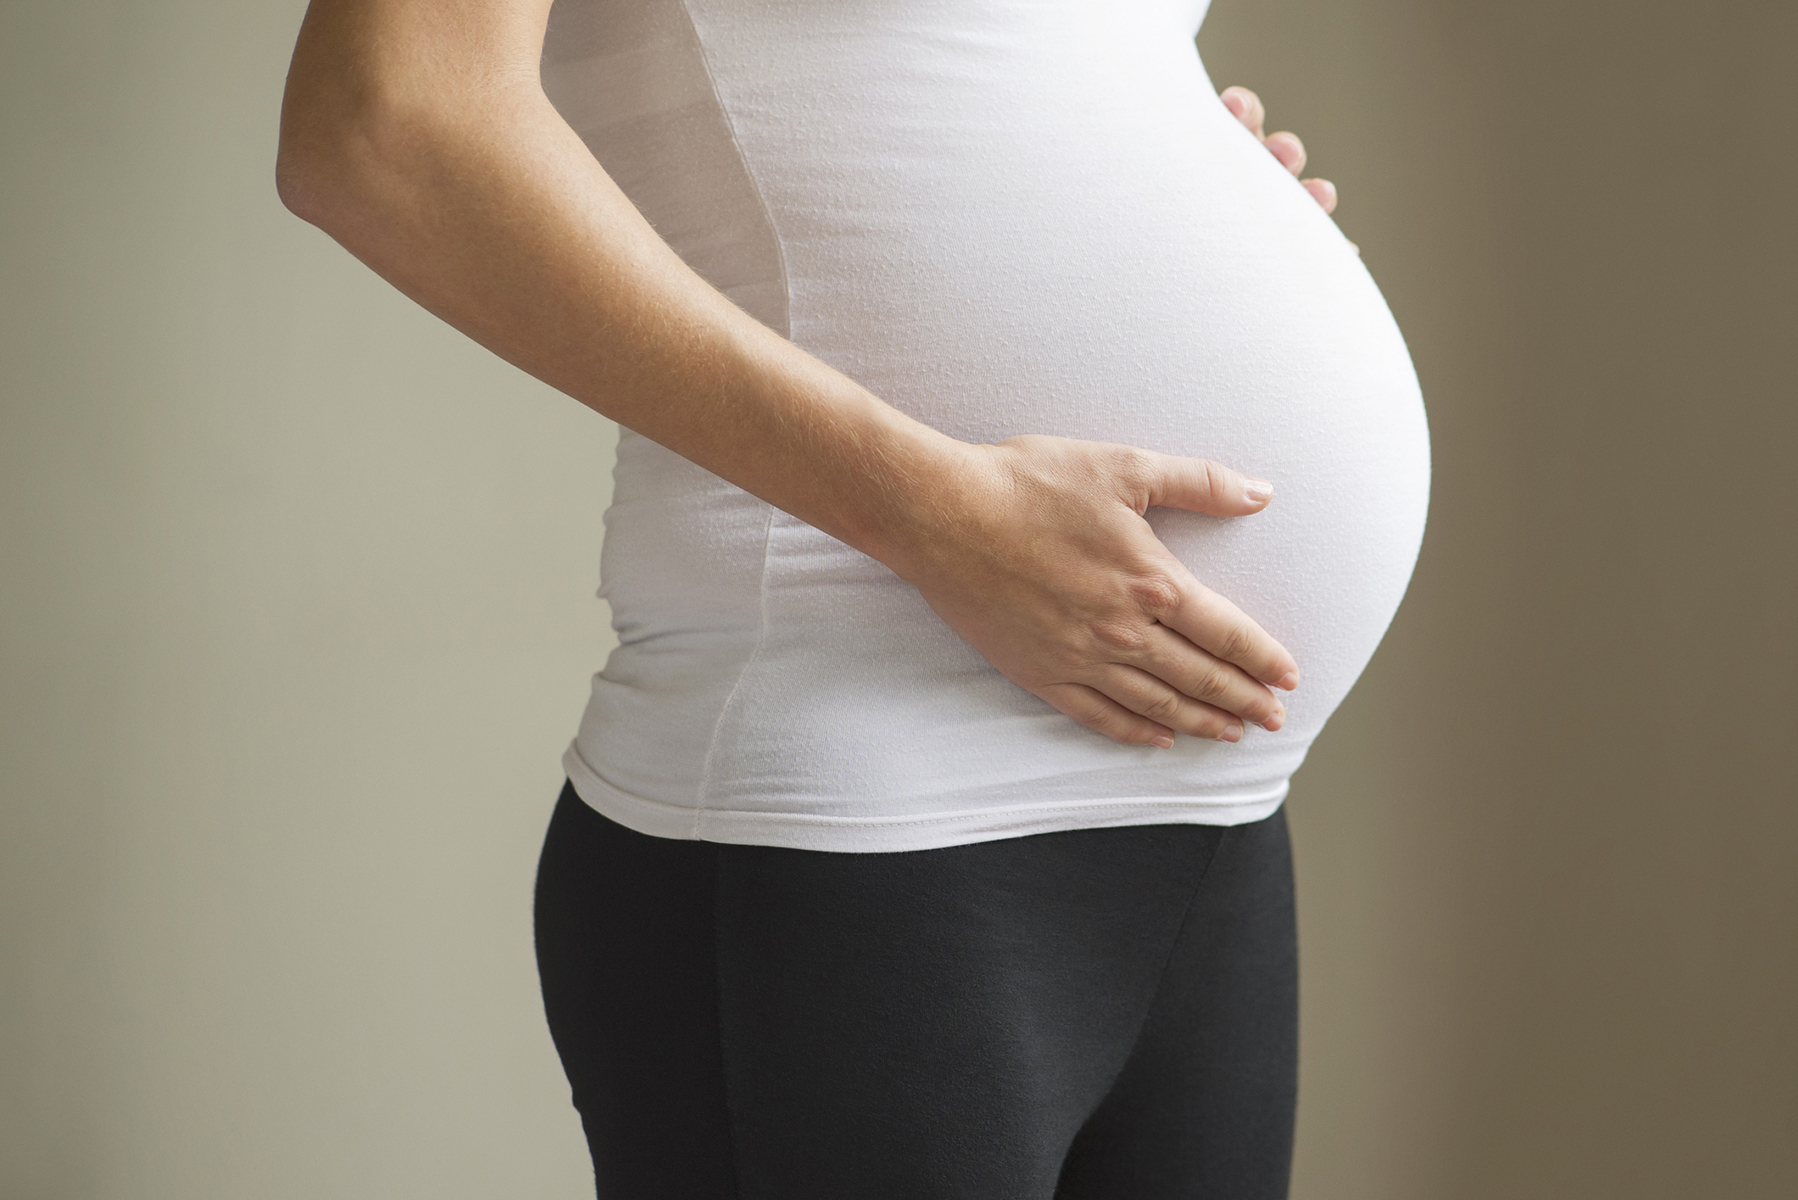 How old is too old for a safe pregnancy?